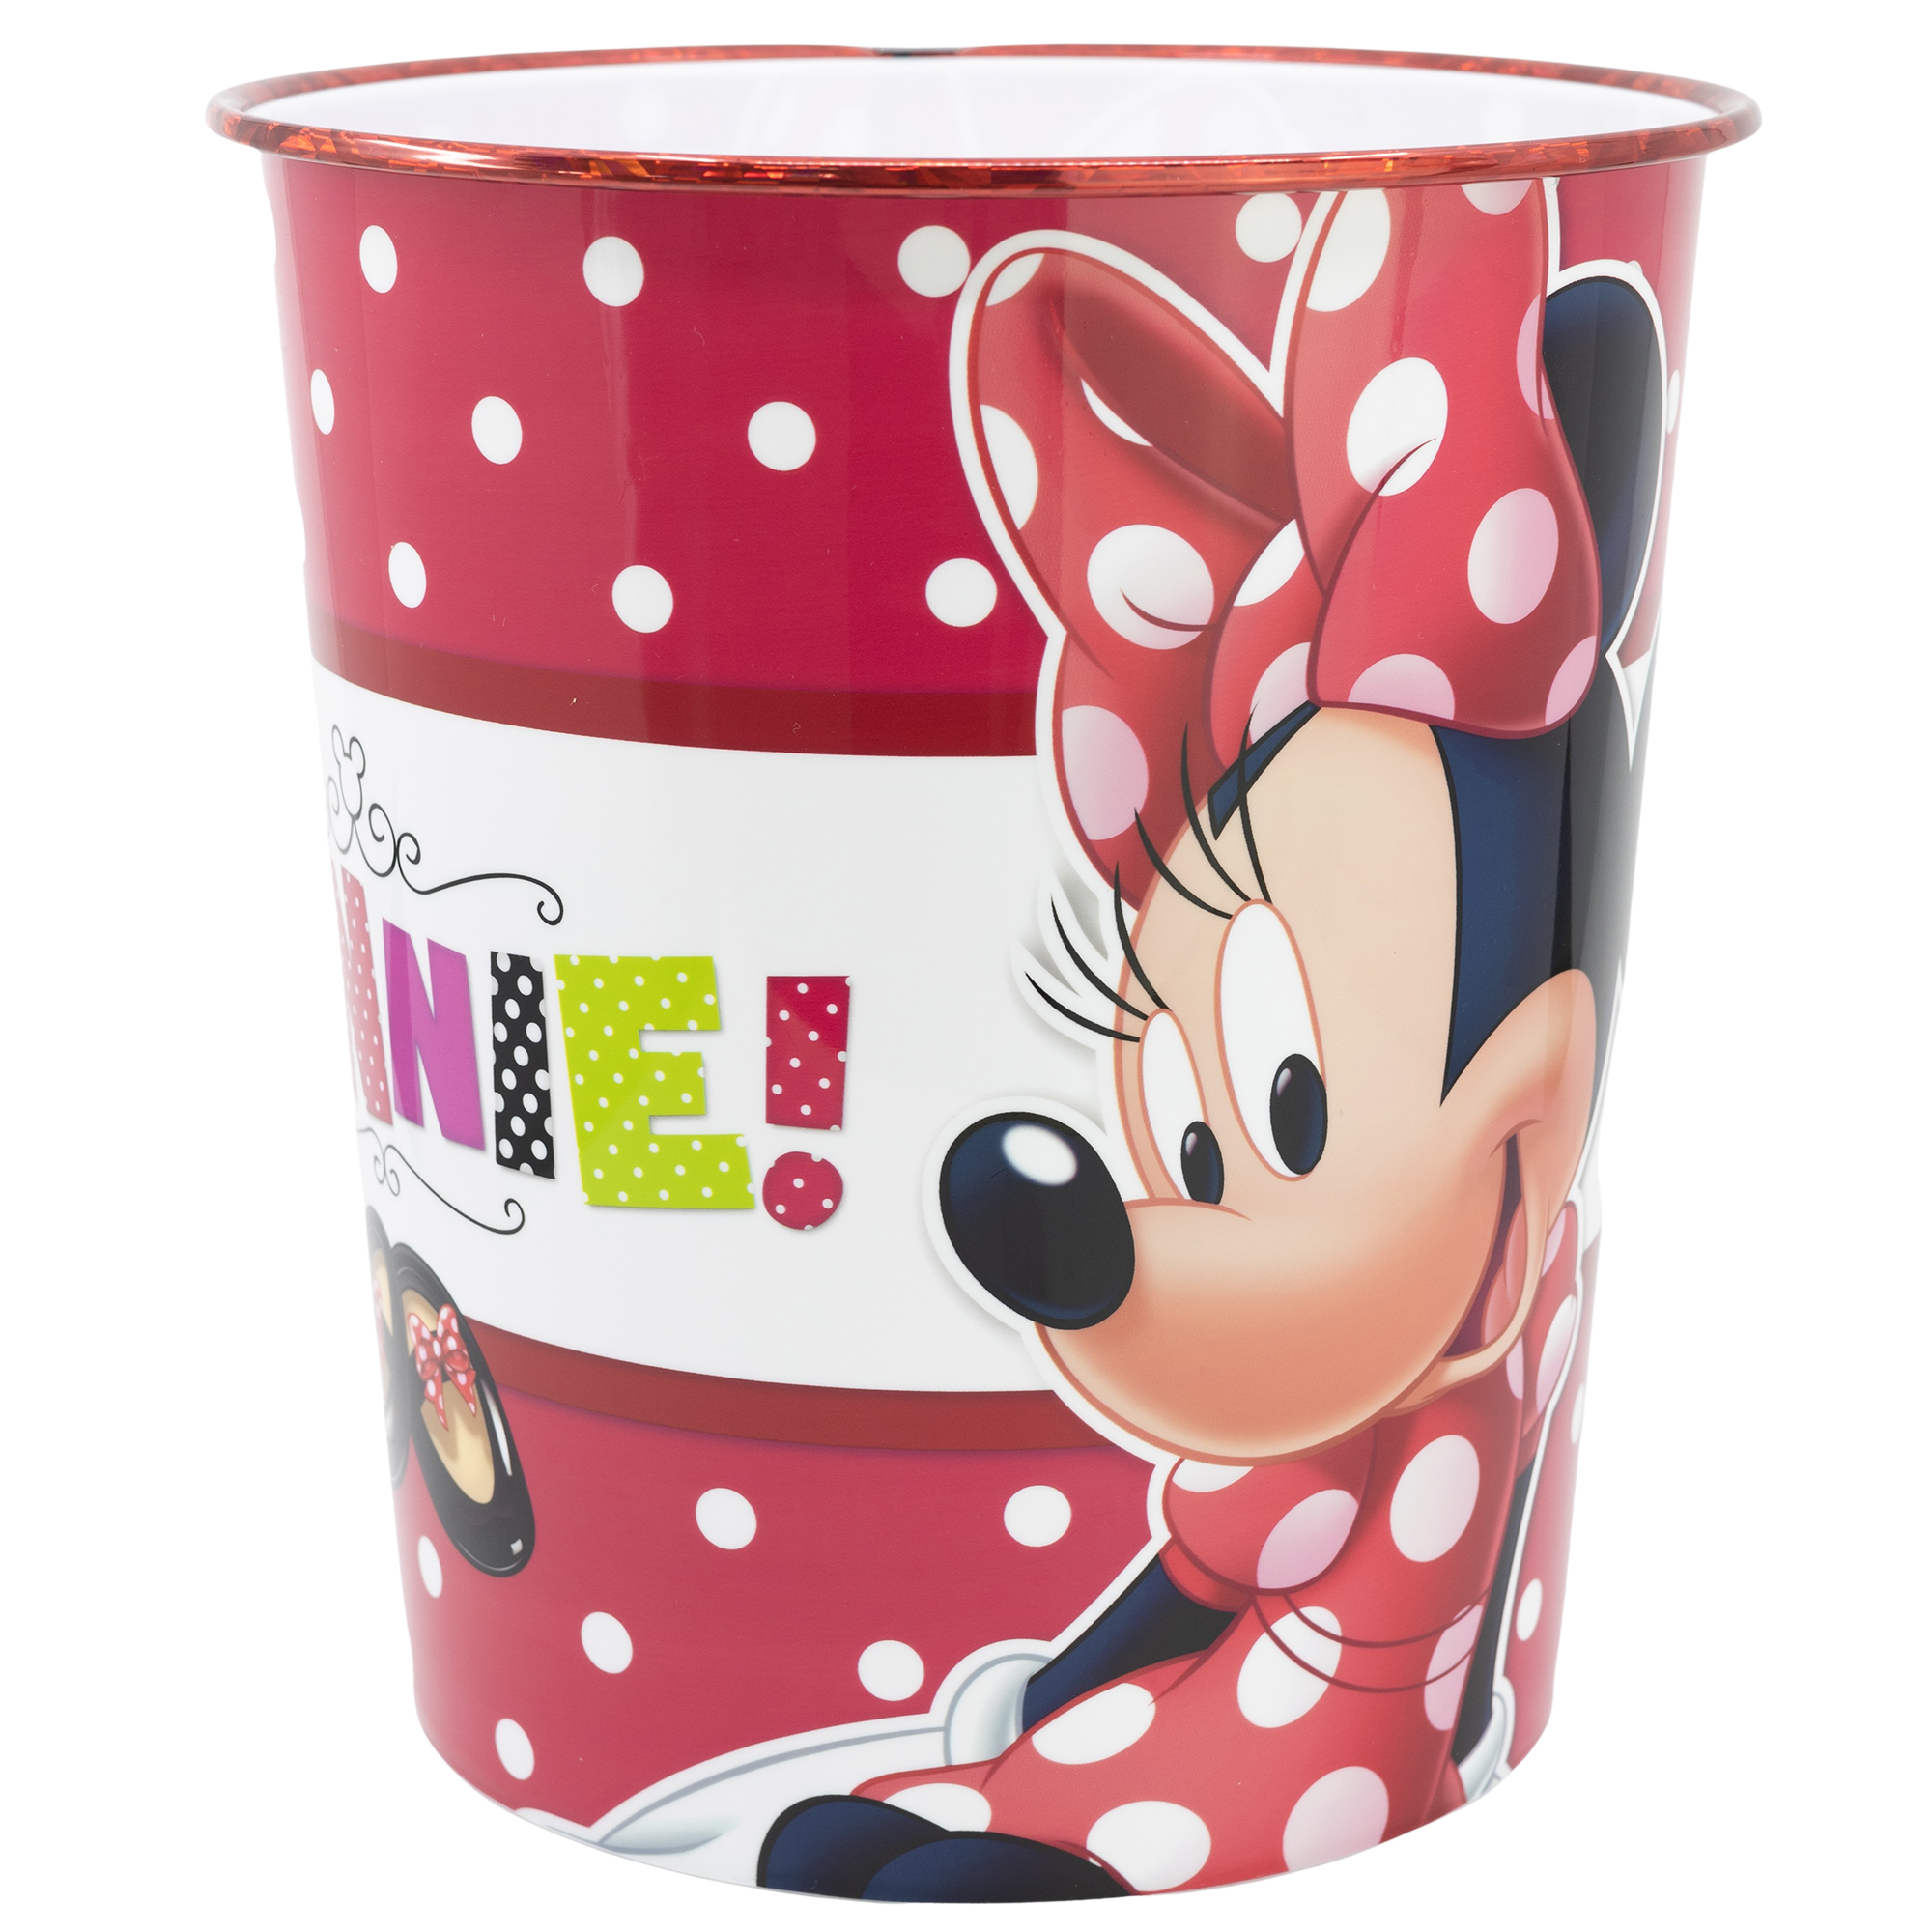 Storcestino Metallico Per Bambini Minnie Mouse Mad About Shopping, 72288 